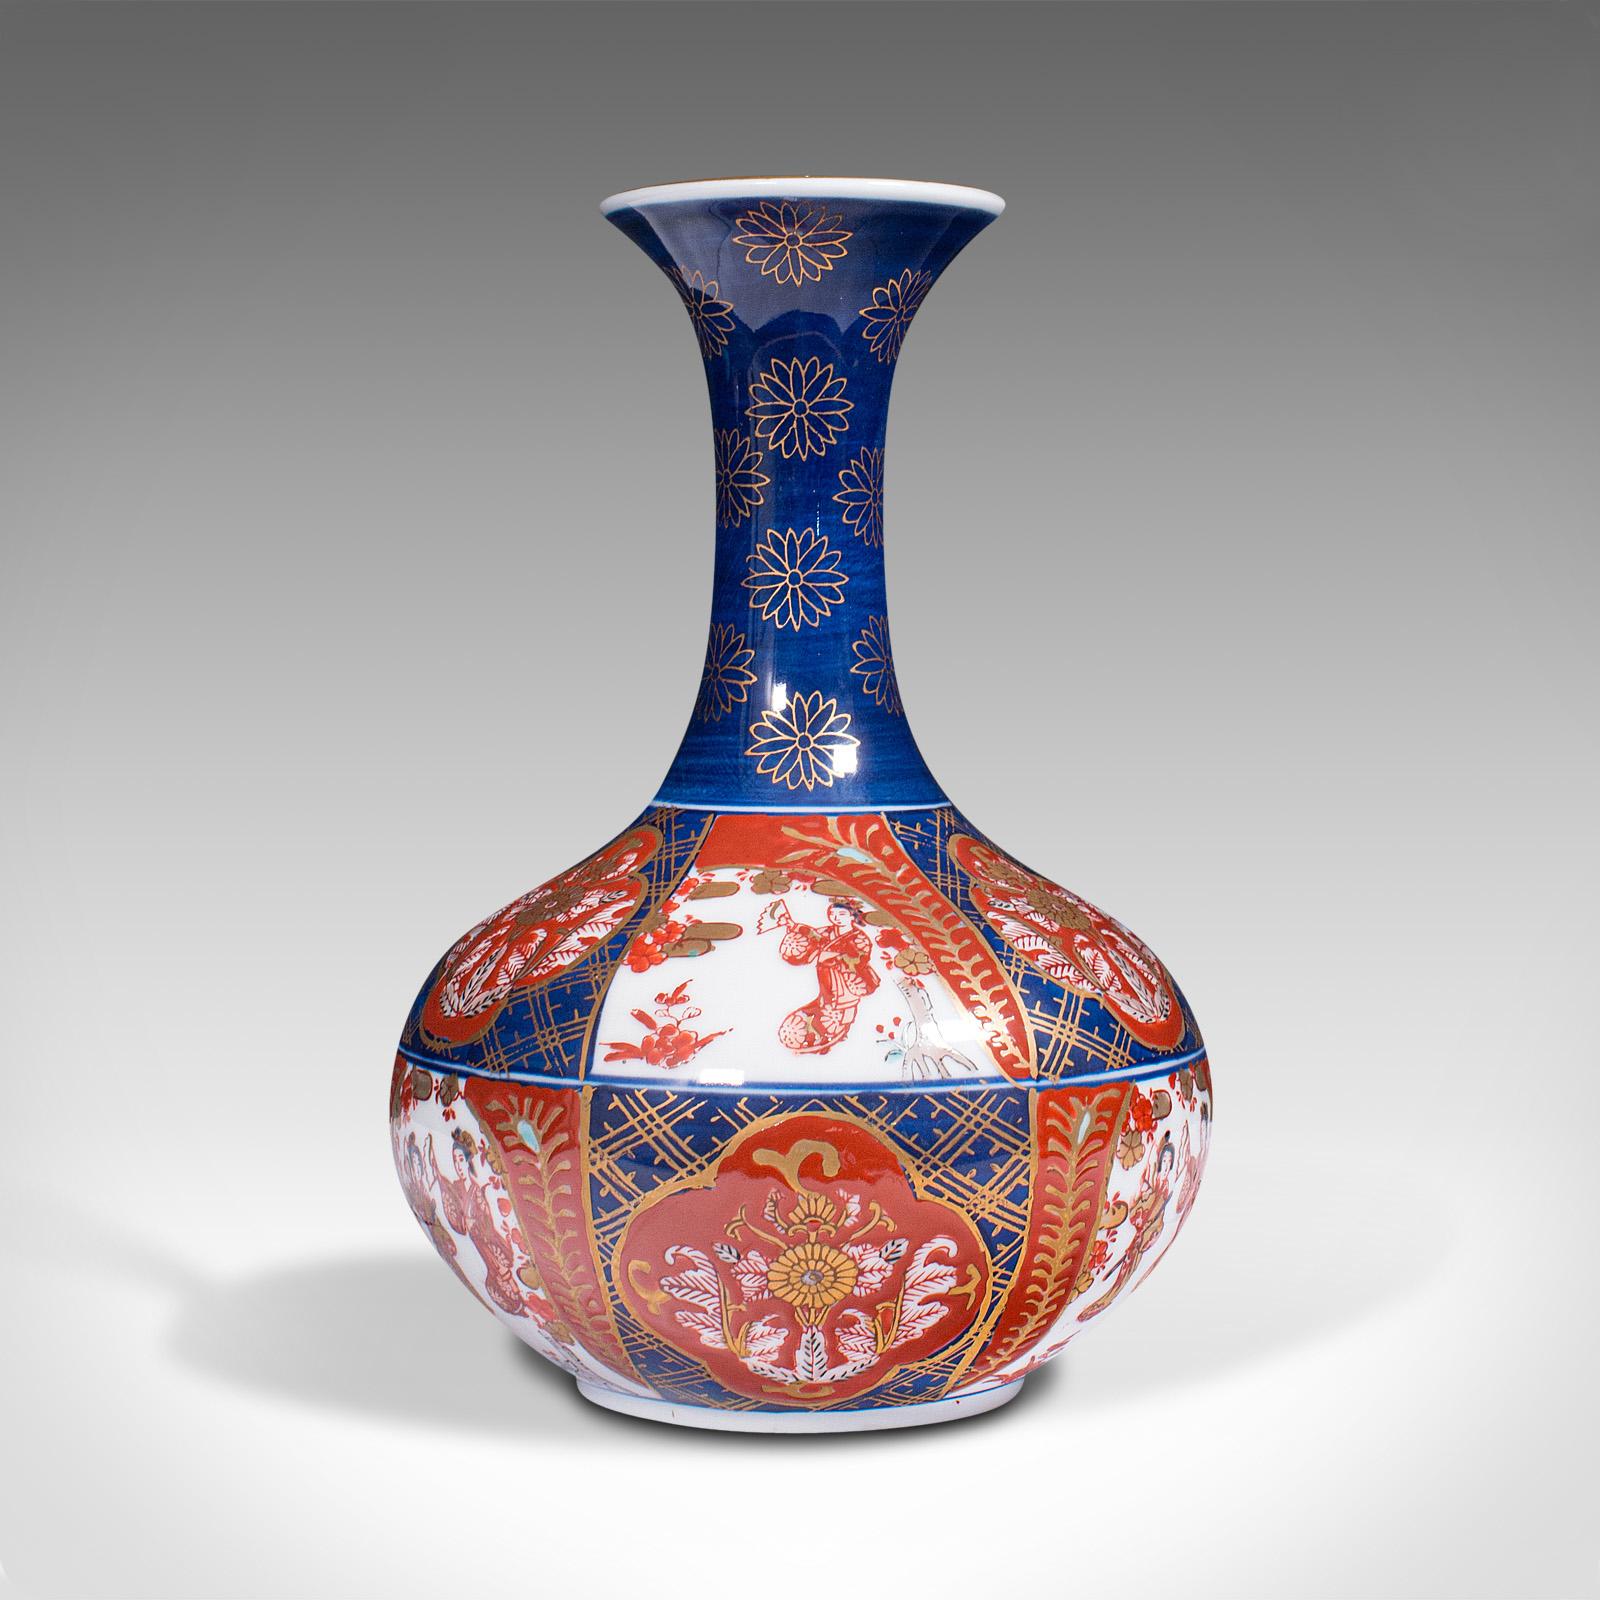 This is a vintage Imari revival flower vase. A Chinese, ceramic decorative display urn, dating to the late 20th century, circa 1980.

Vibrant red and blue palette a hallmark of the Imari taste
Displaying a desirable aged patina